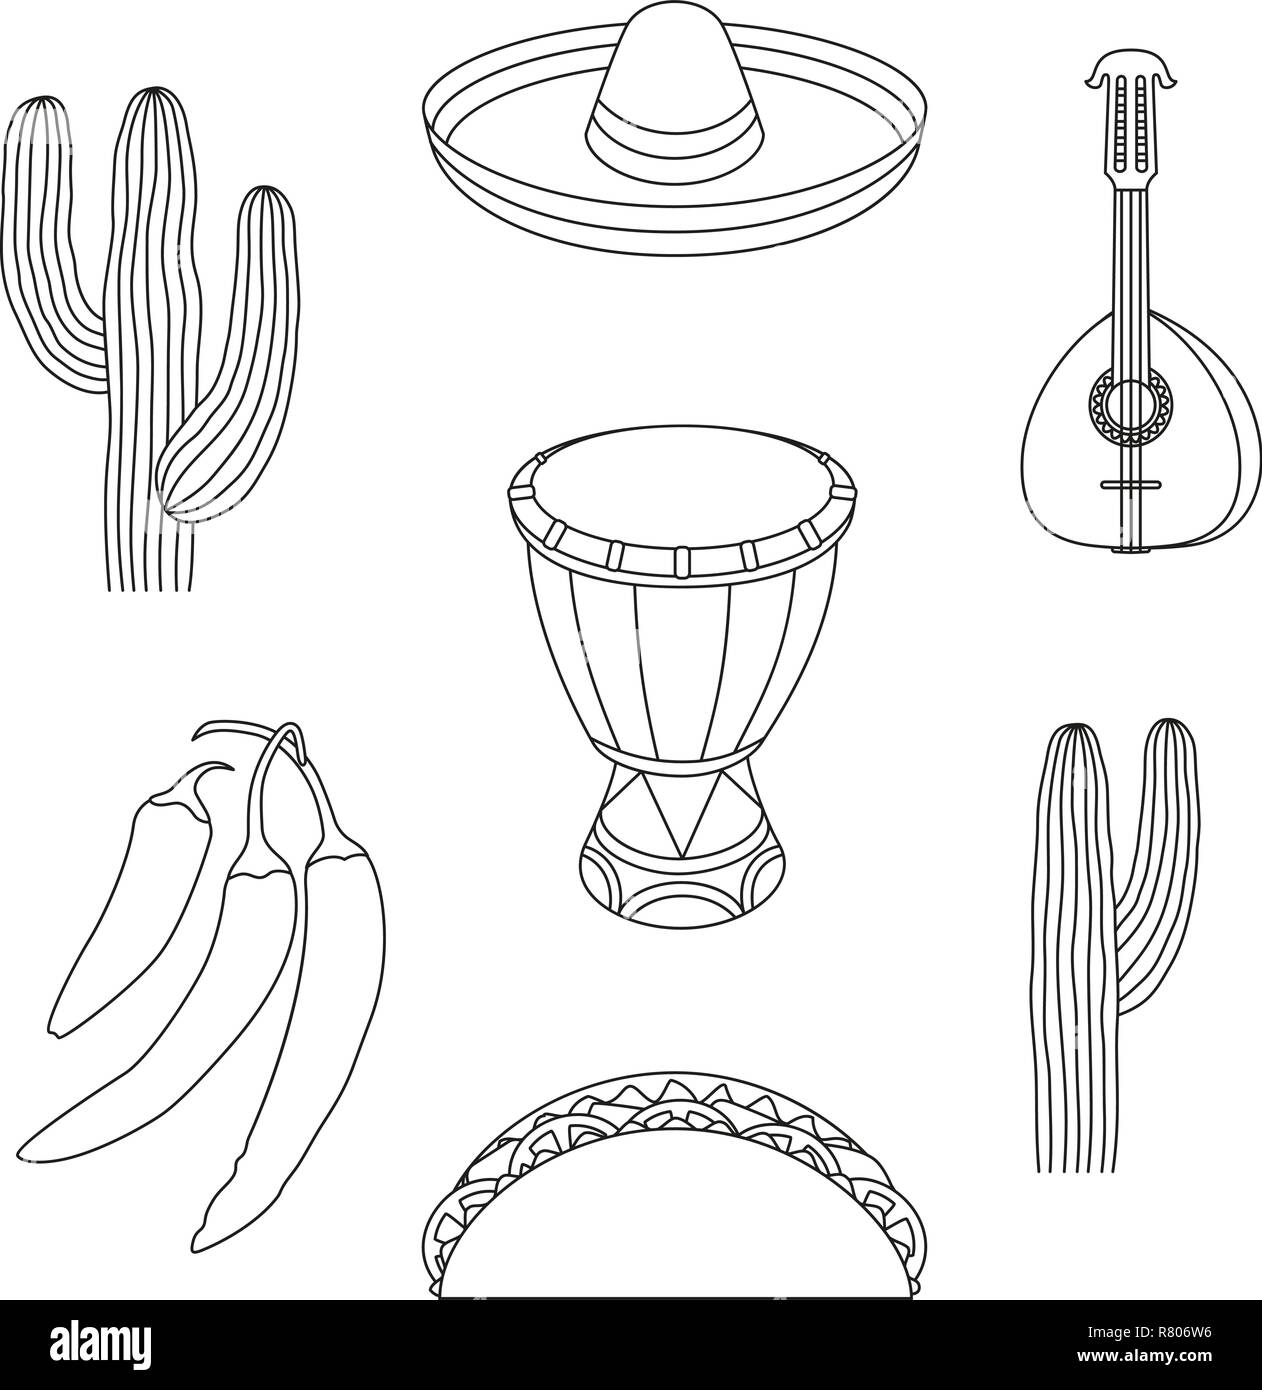 Line art black and white 7 mexican elements. Stock Vector